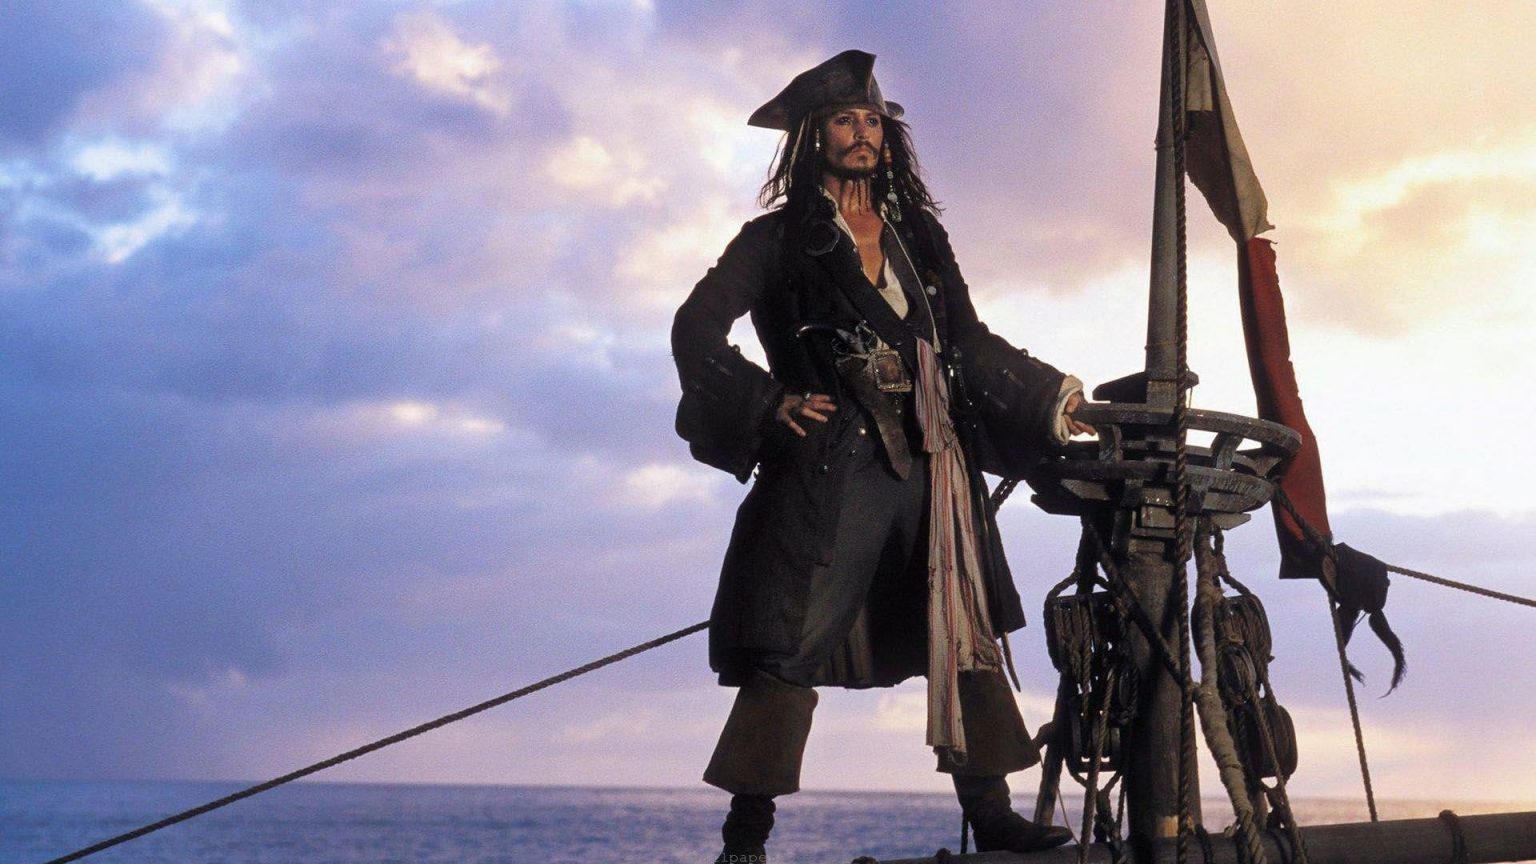 Pirates of the Caribbean: The Curse of the Black Pearl - Featured Image